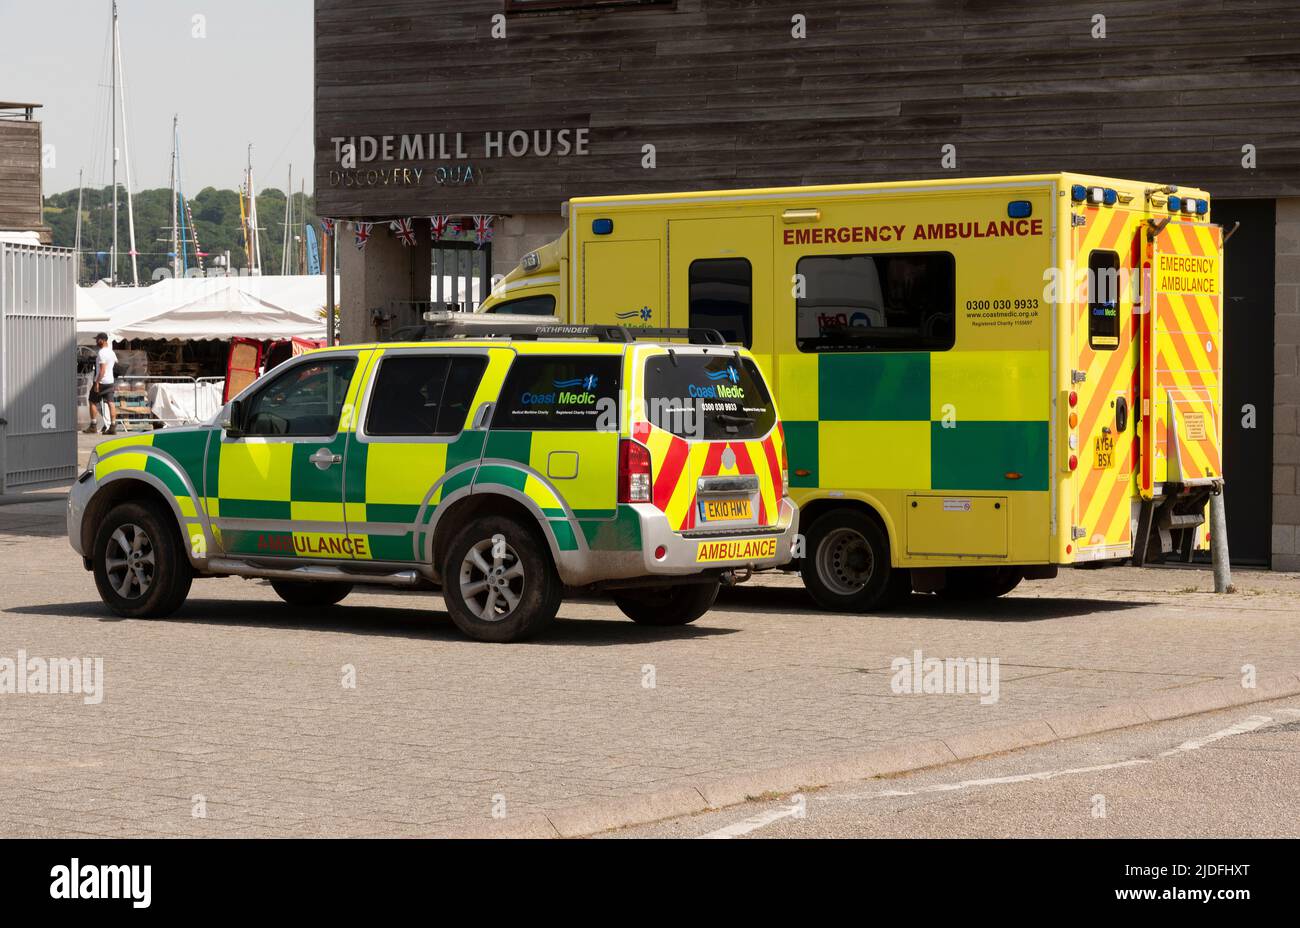 Falmouth Cornwall England UK. 2022. Emergency vehicles waiting on Discovery Quay on Falmouth's waterfront area. Stock Photo